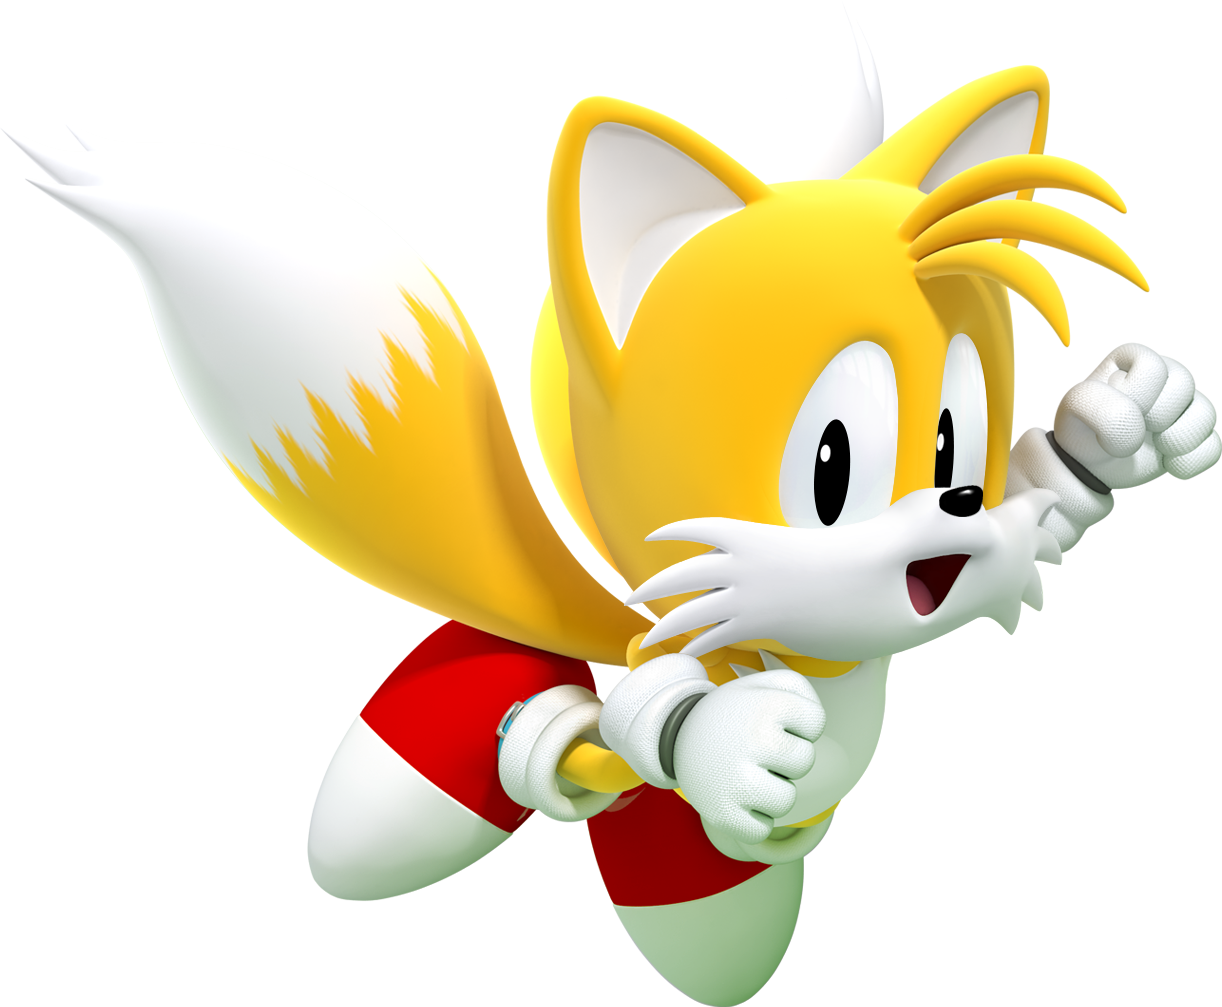 sonic generations real tails mod